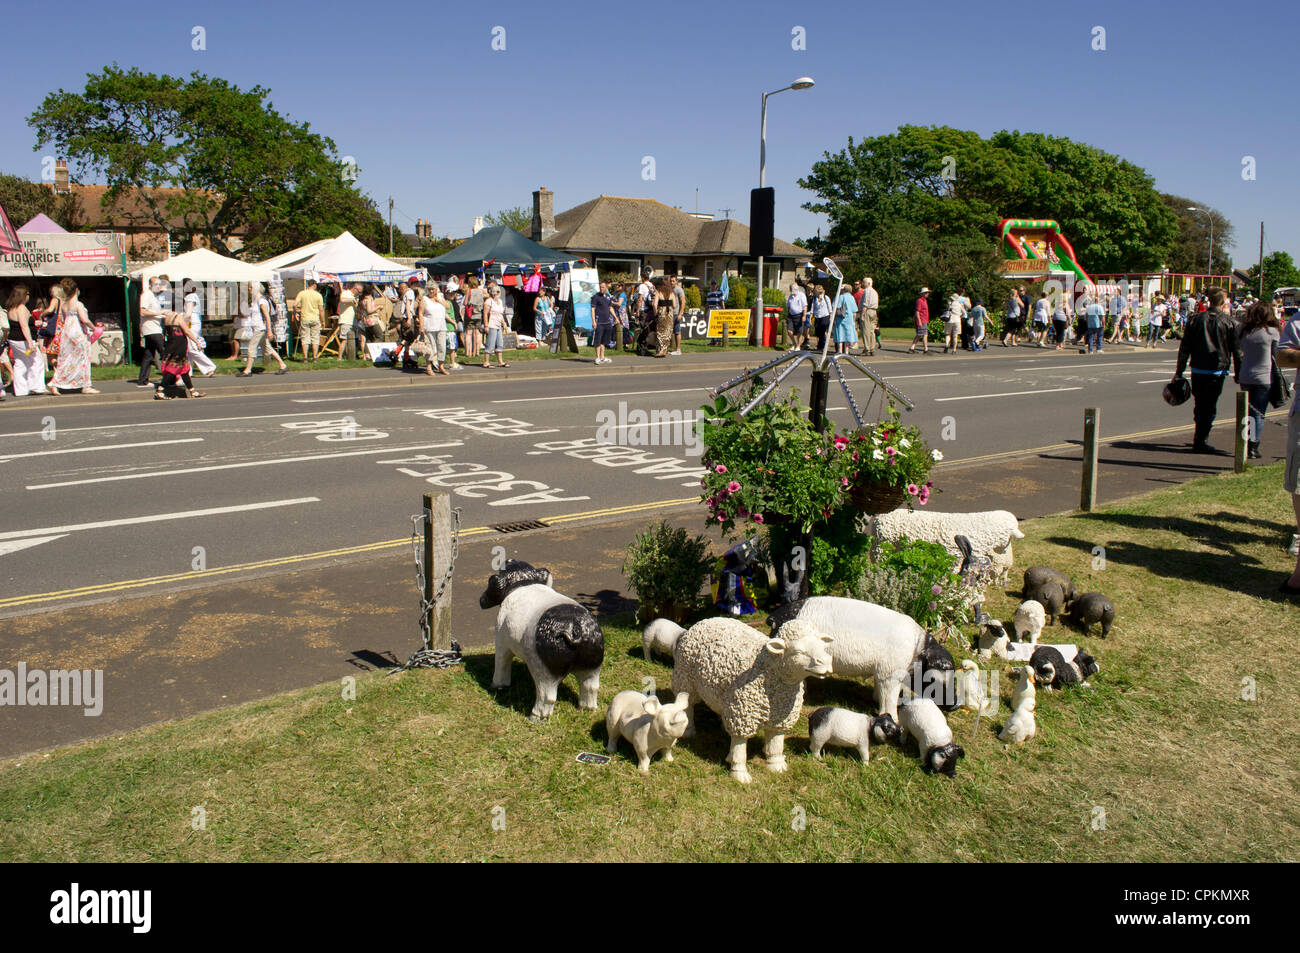 Sculptures of sheep and farmyard animals set on grass under a 4-arm hanging basket roadside at Yarmouth Old Gaffers Festival, Isle of Wight, 2012. Stock Photo